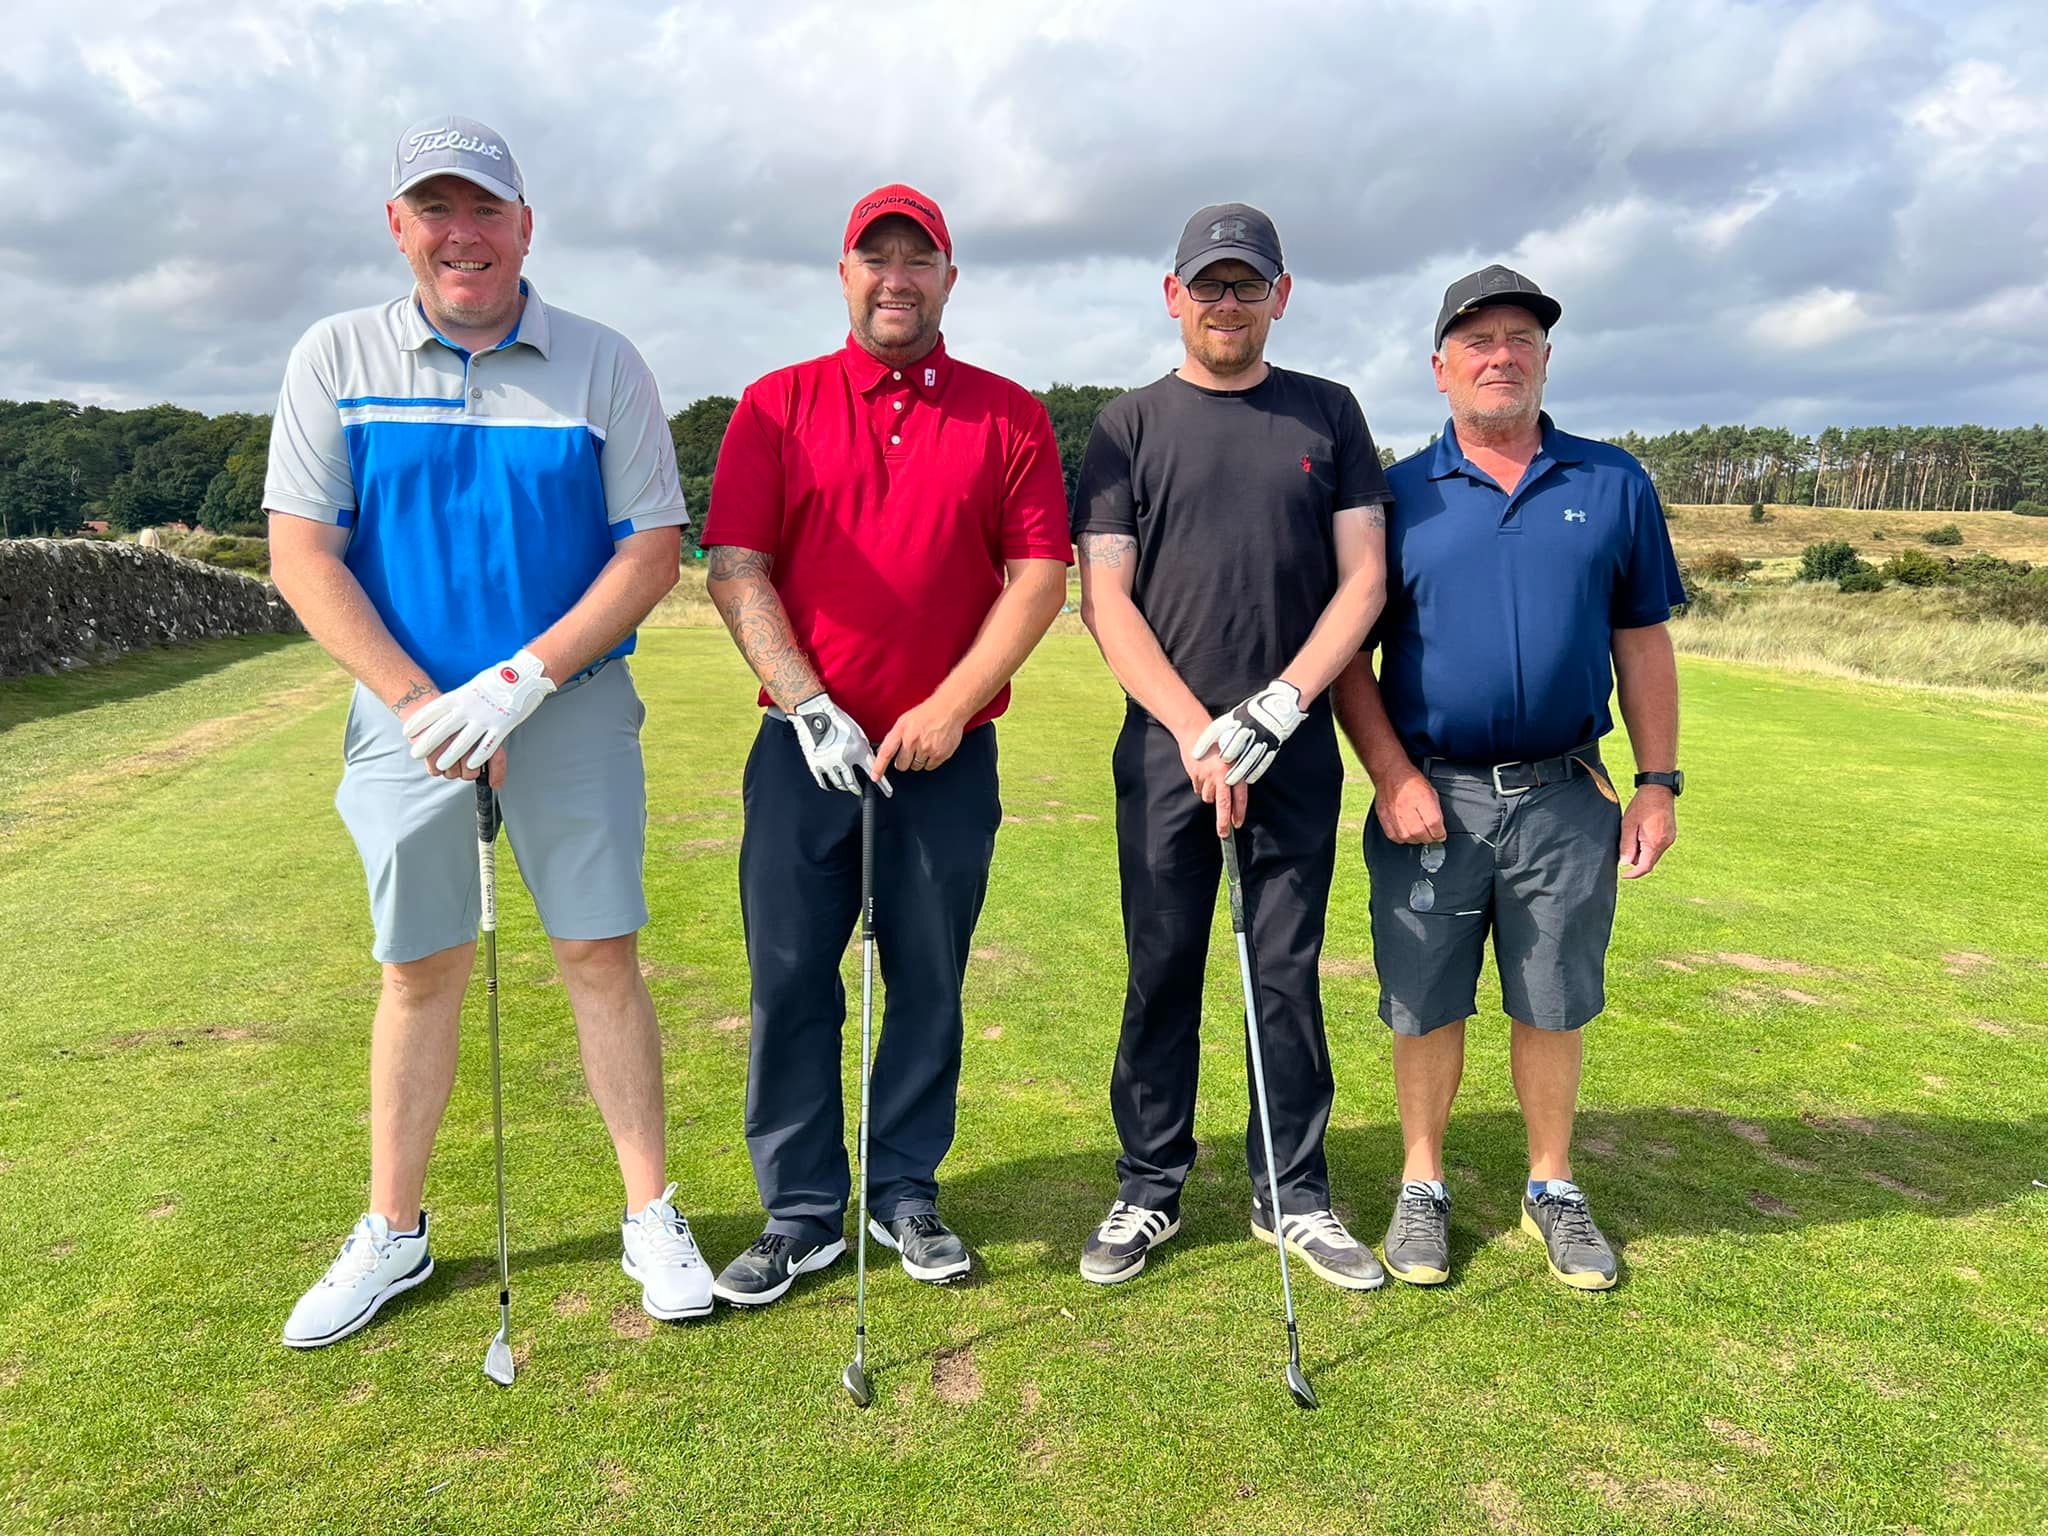 In Pictures: Thousands raised at Campion Homes golf day